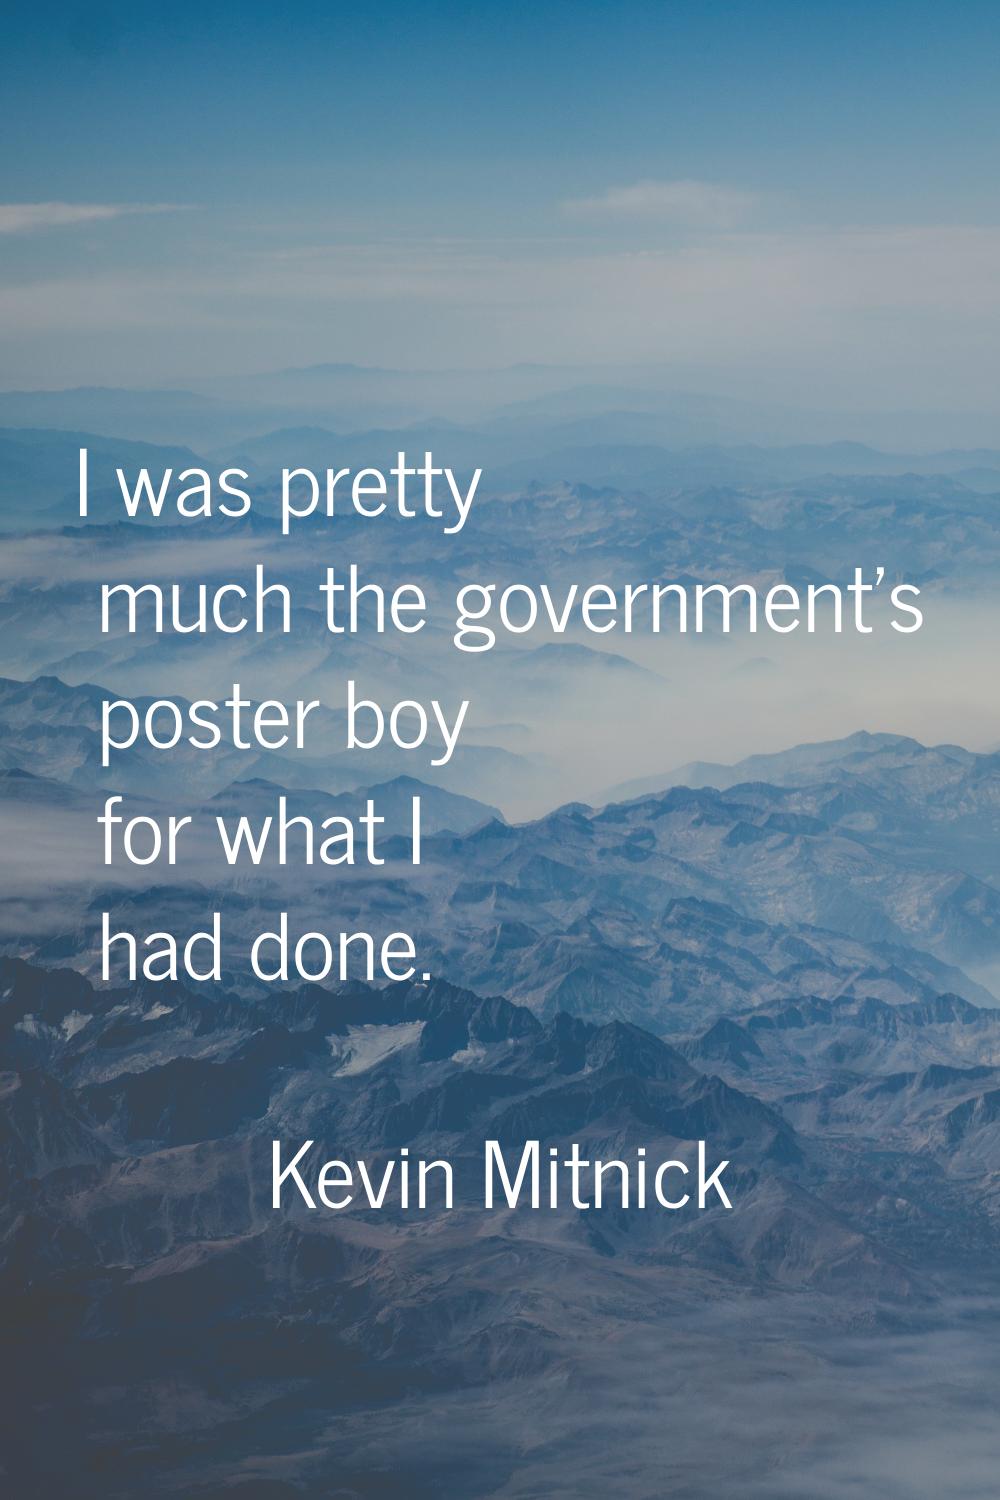 I was pretty much the government's poster boy for what I had done.